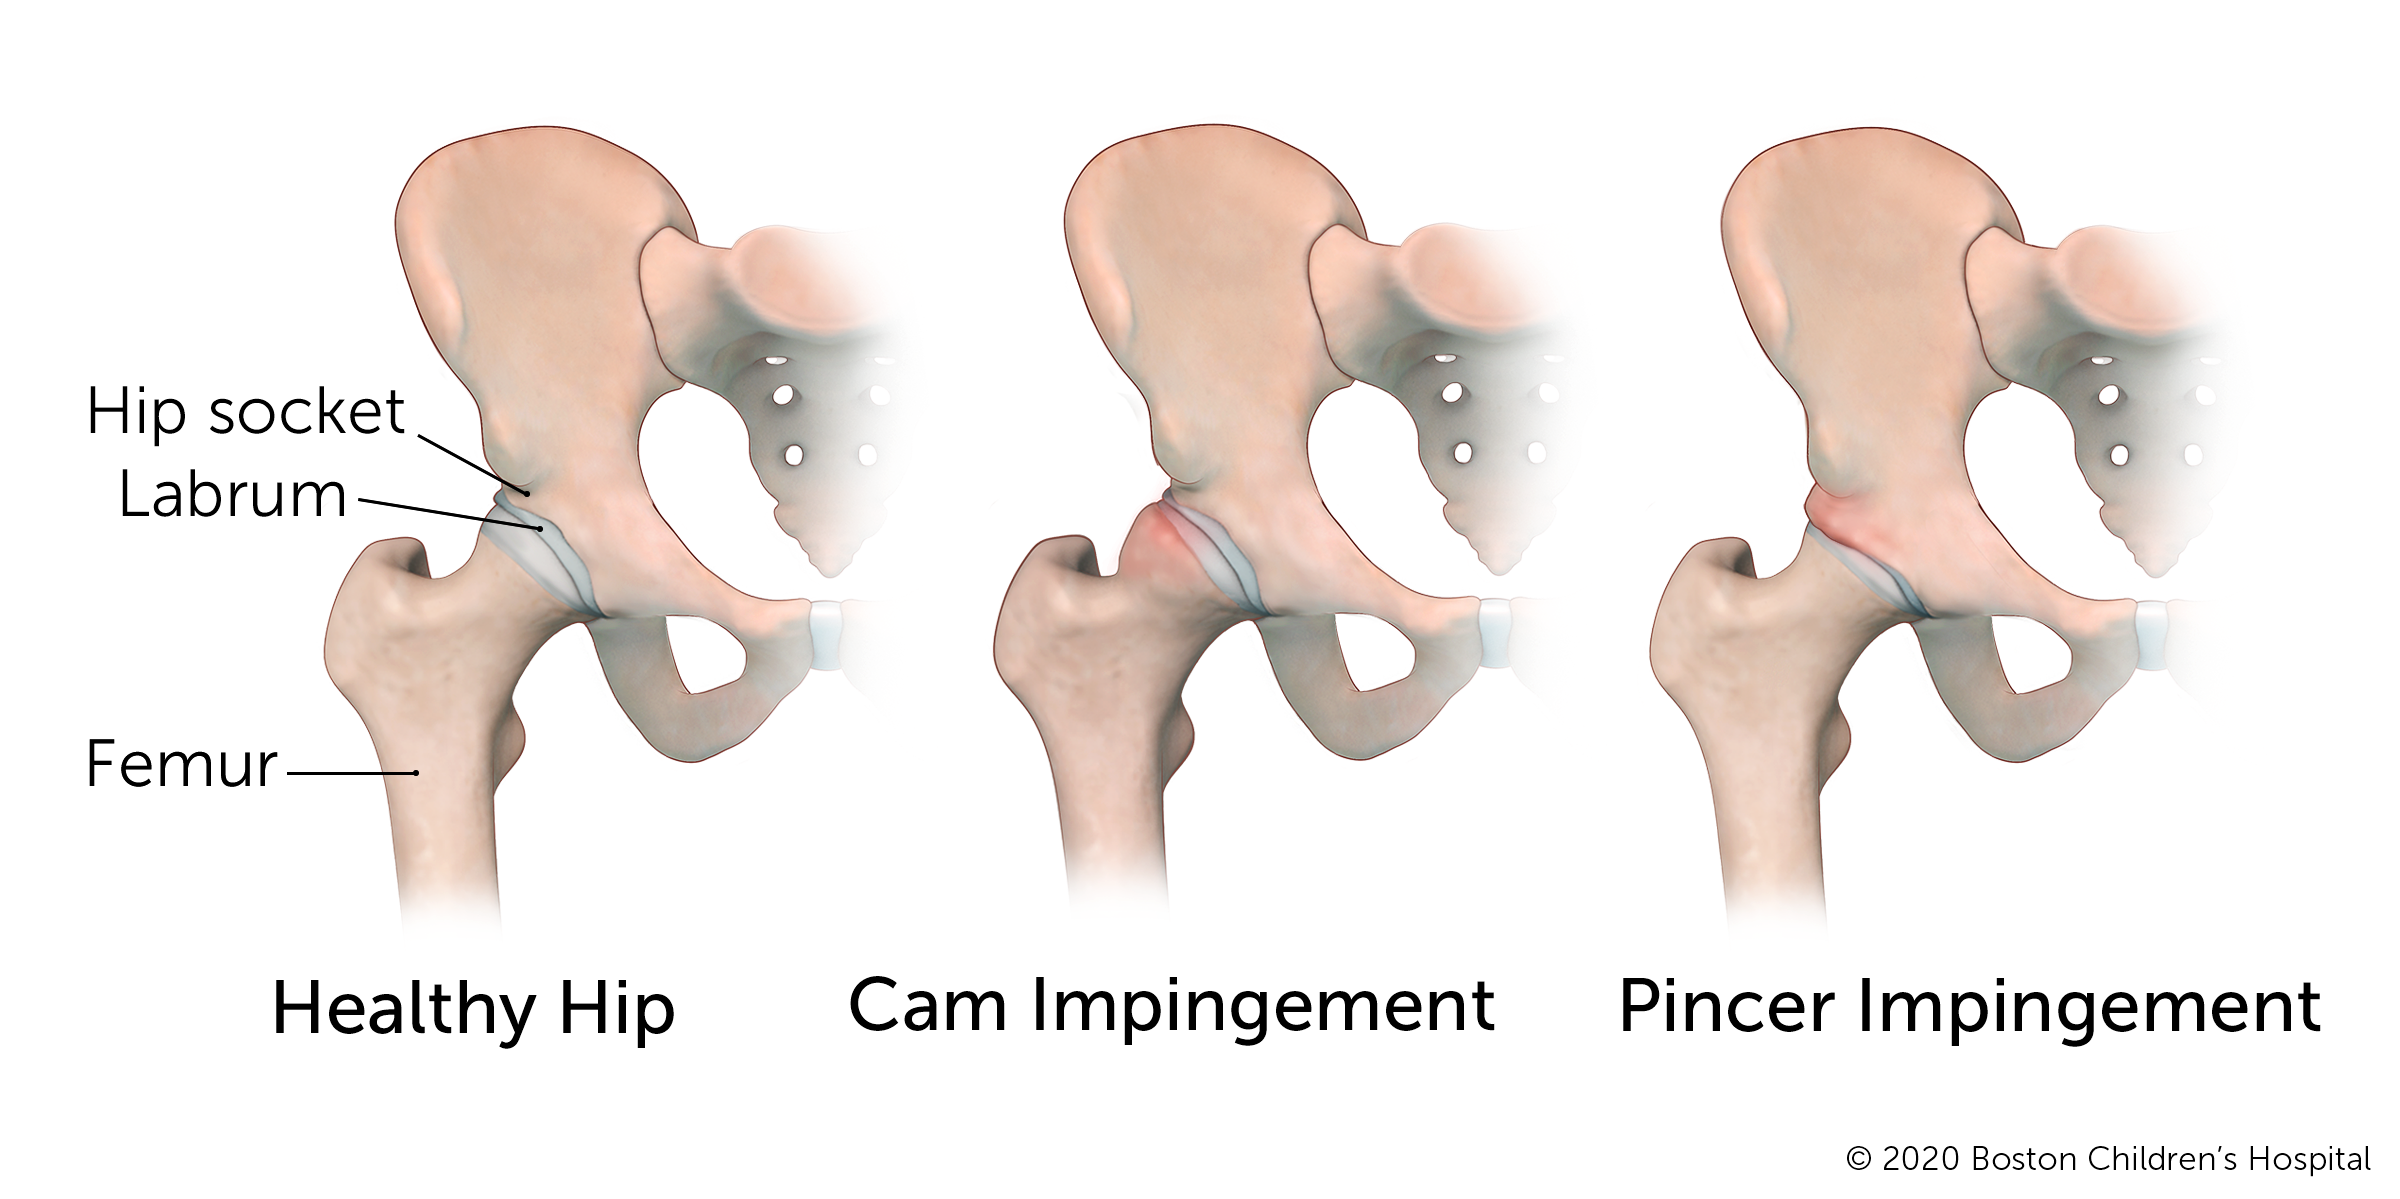 Hip impingement: Here is a look at a healthy hip, a hip with a cam impingement, and a hip with a pincer impingement.